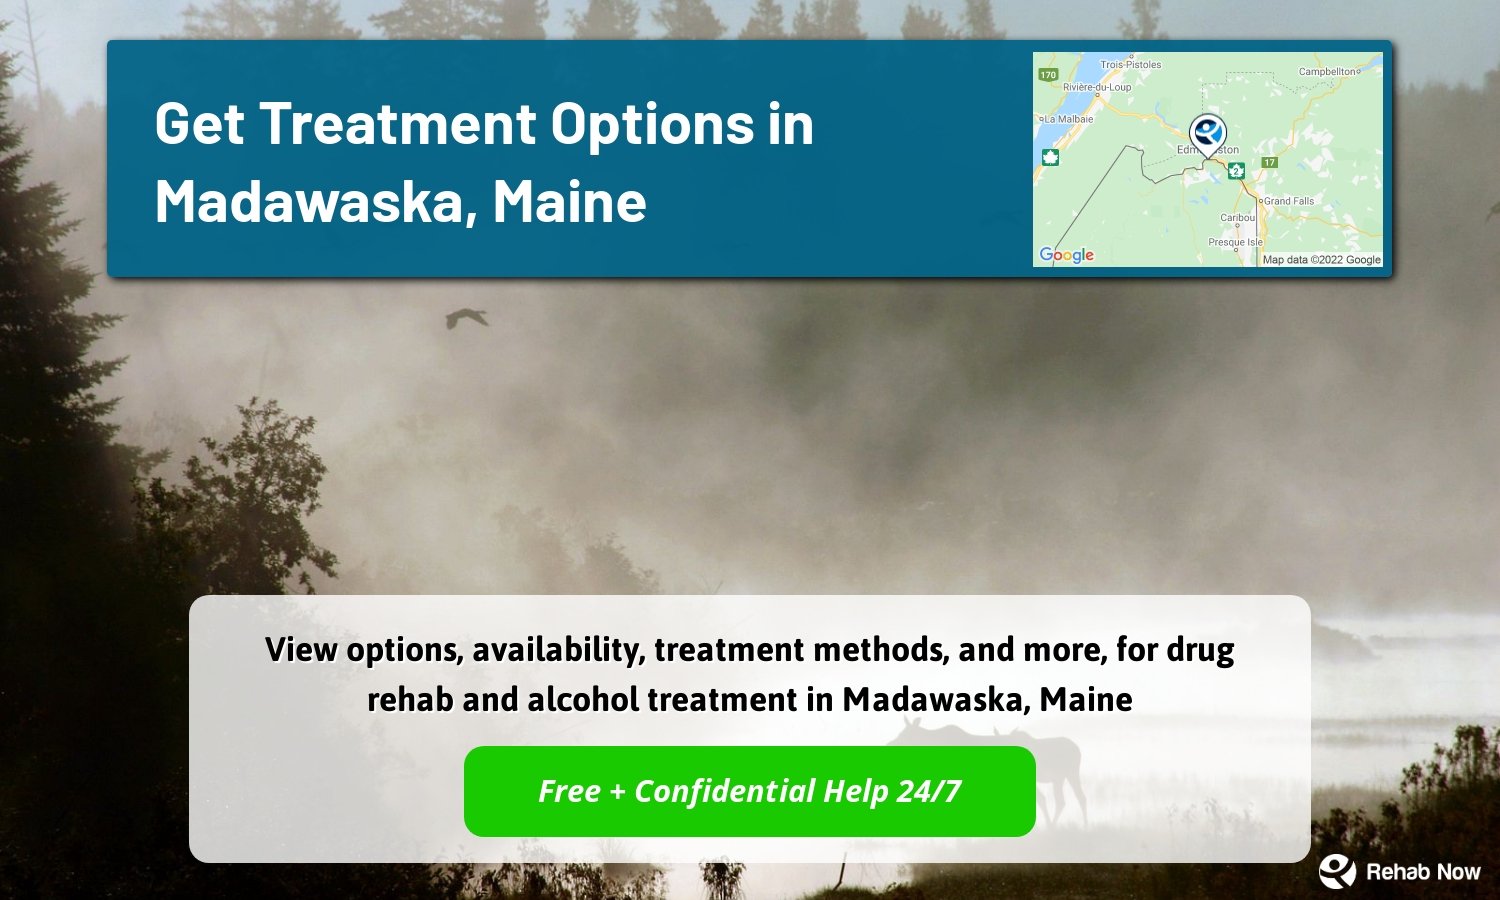 View options, availability, treatment methods, and more, for drug rehab and alcohol treatment in Madawaska, Maine